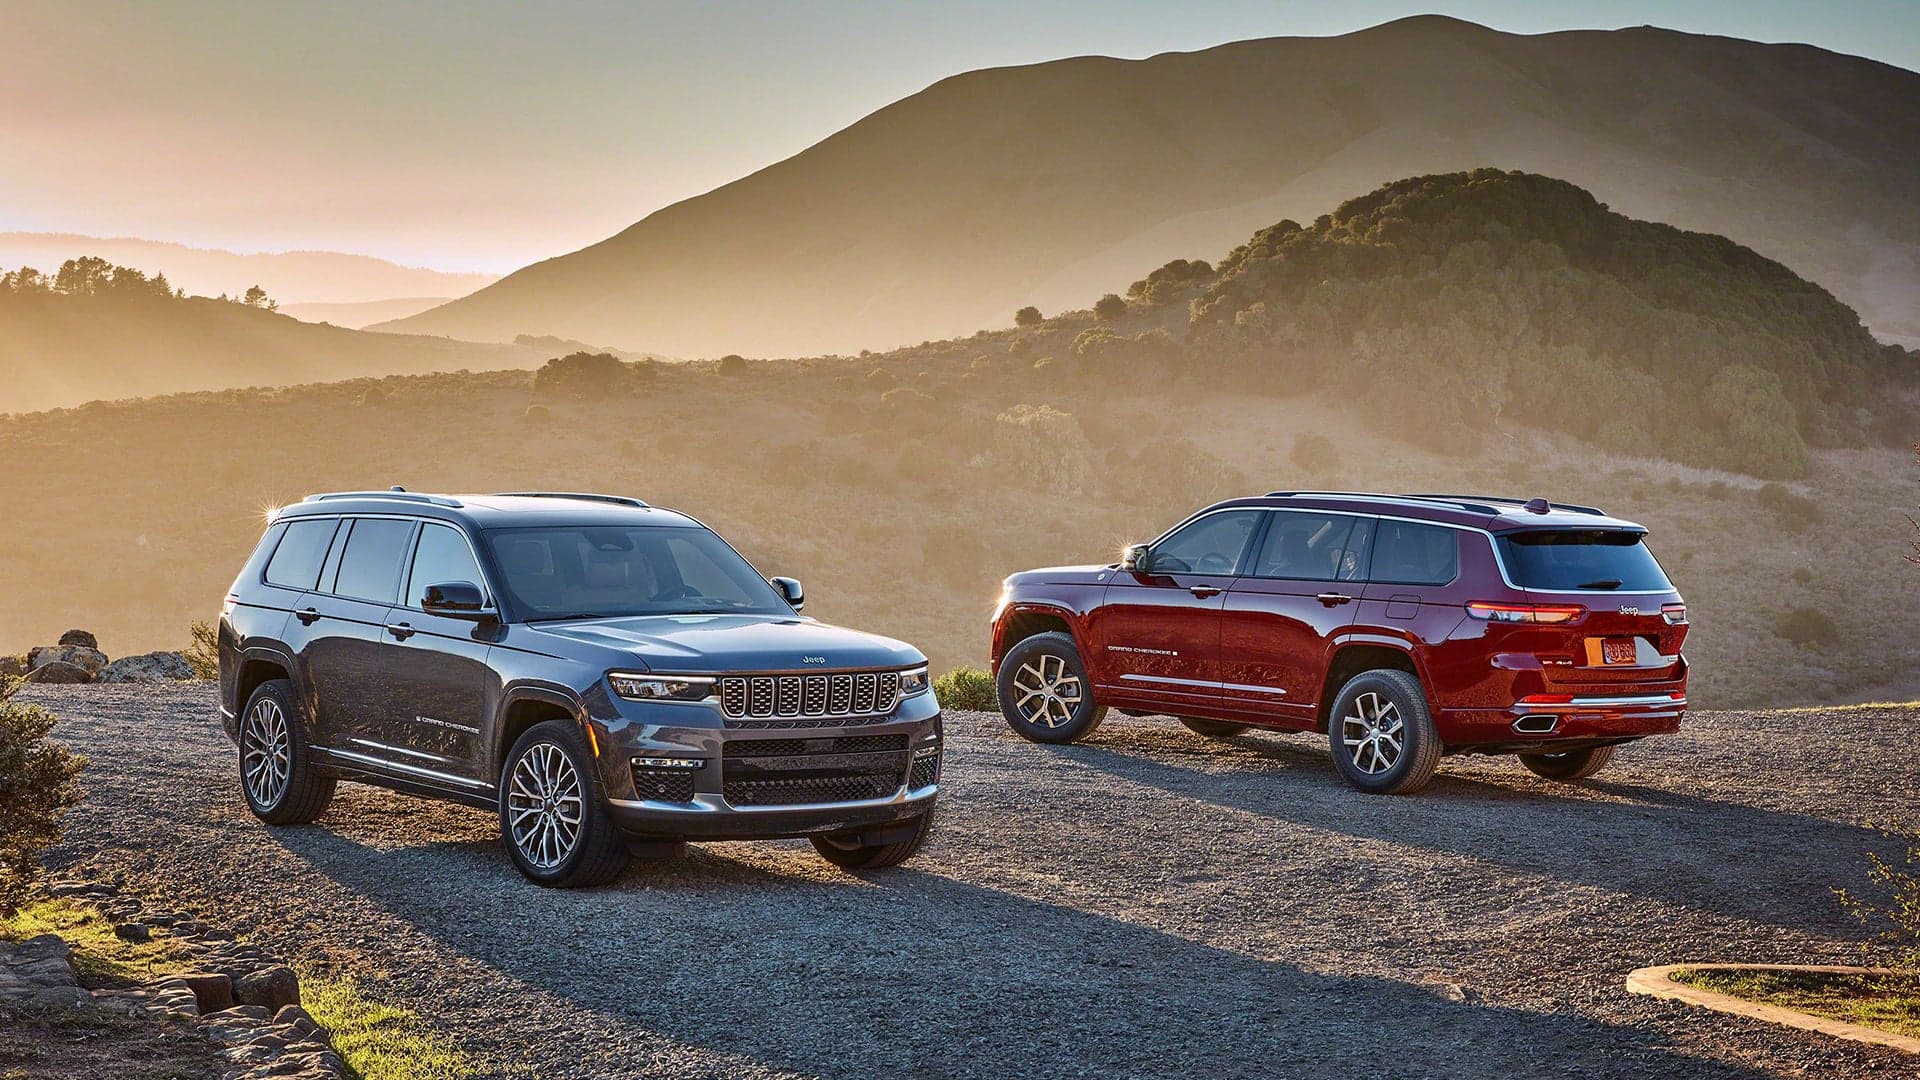 2021 Jeep Grand Cherokee L Adds Three Rows of Seats and Lots More Luxury